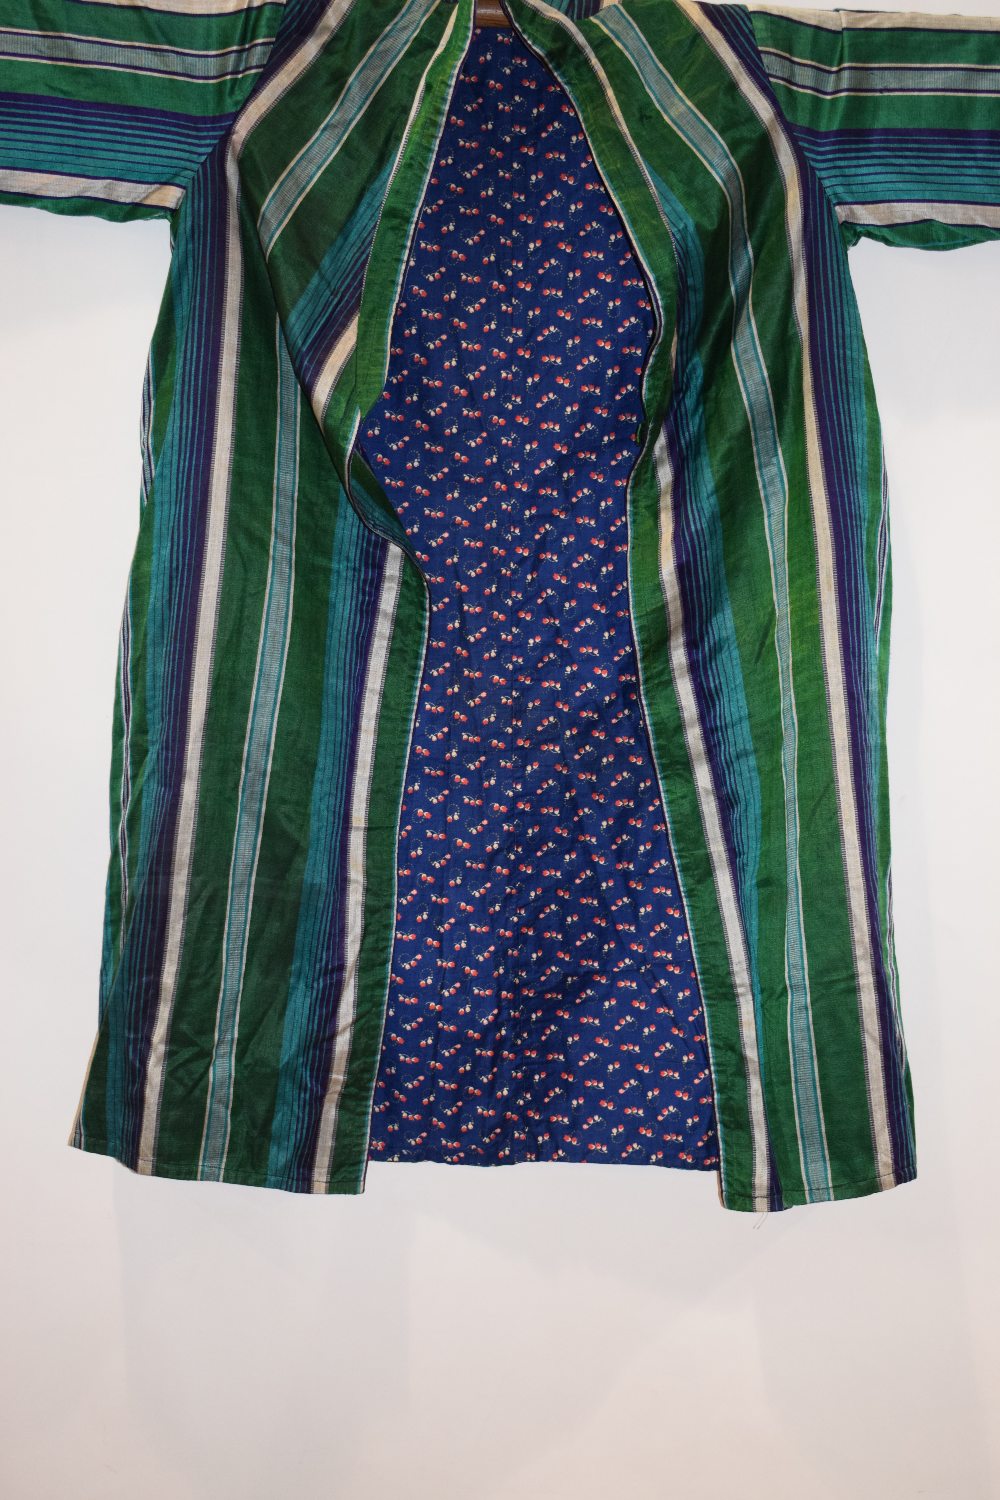 Two Uzbekistan or Afghanistan coats, 20th century, one silk satin with stripes in shades of - Image 16 of 16